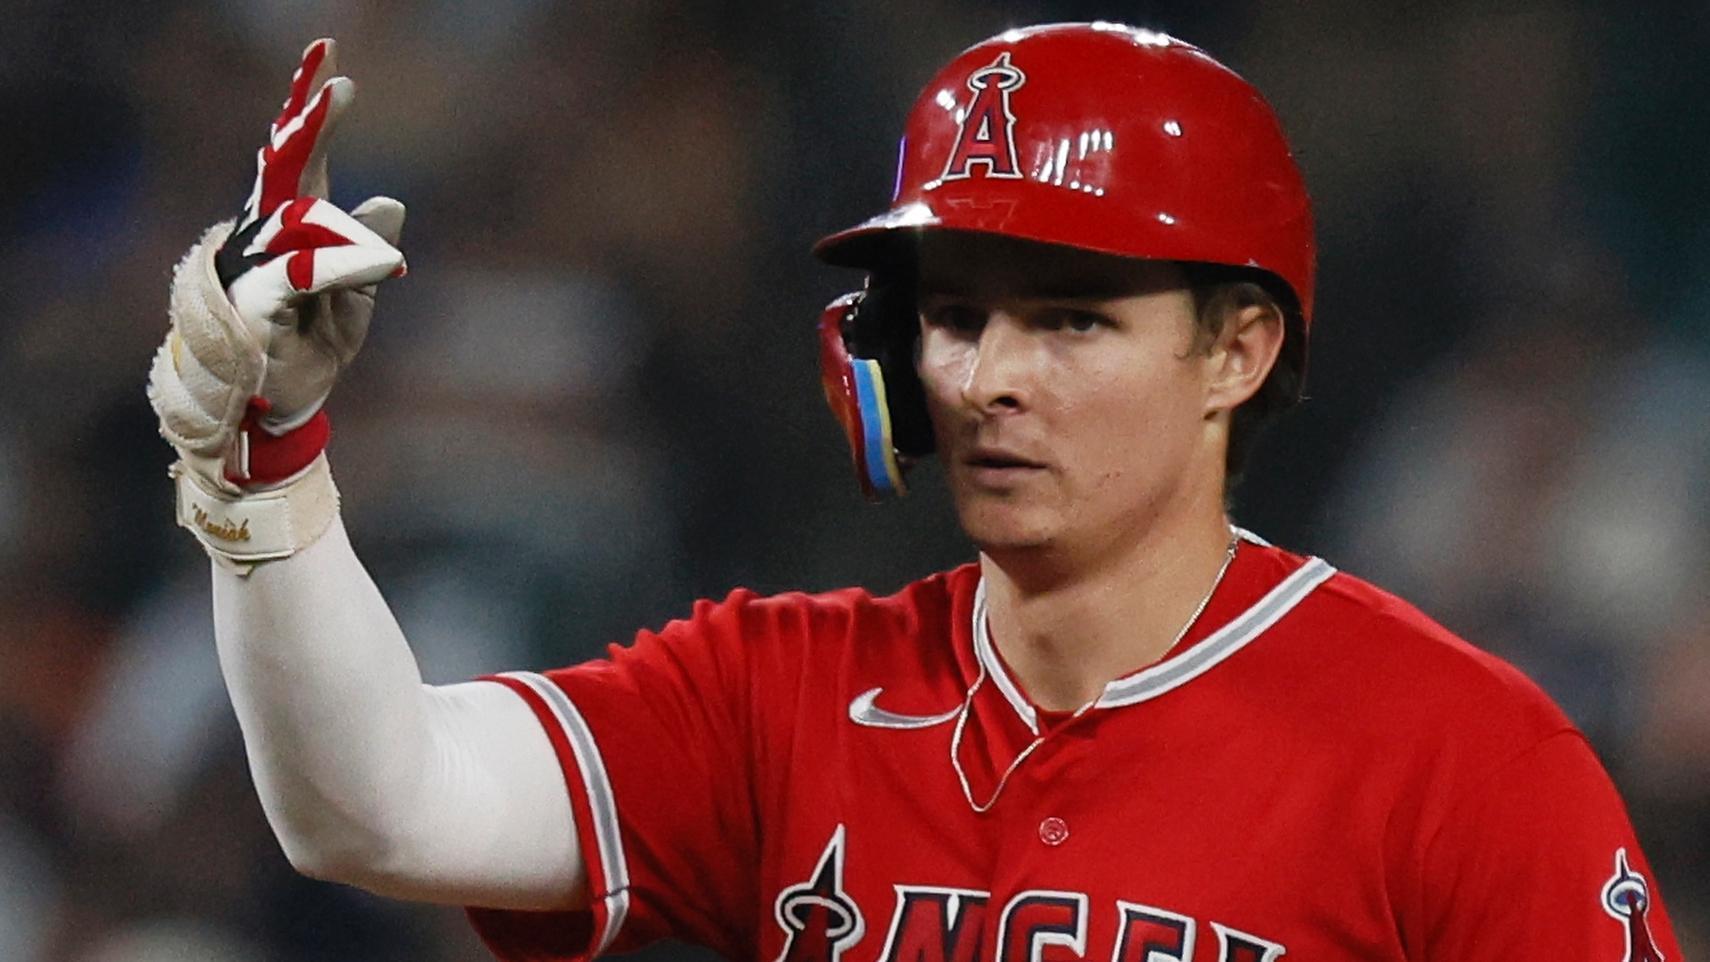 Shohei Ohtani scores 2 runs, Angels beat Tigers 7-6 in 10th after blowing  lead in 9th - ABC7 Los Angeles